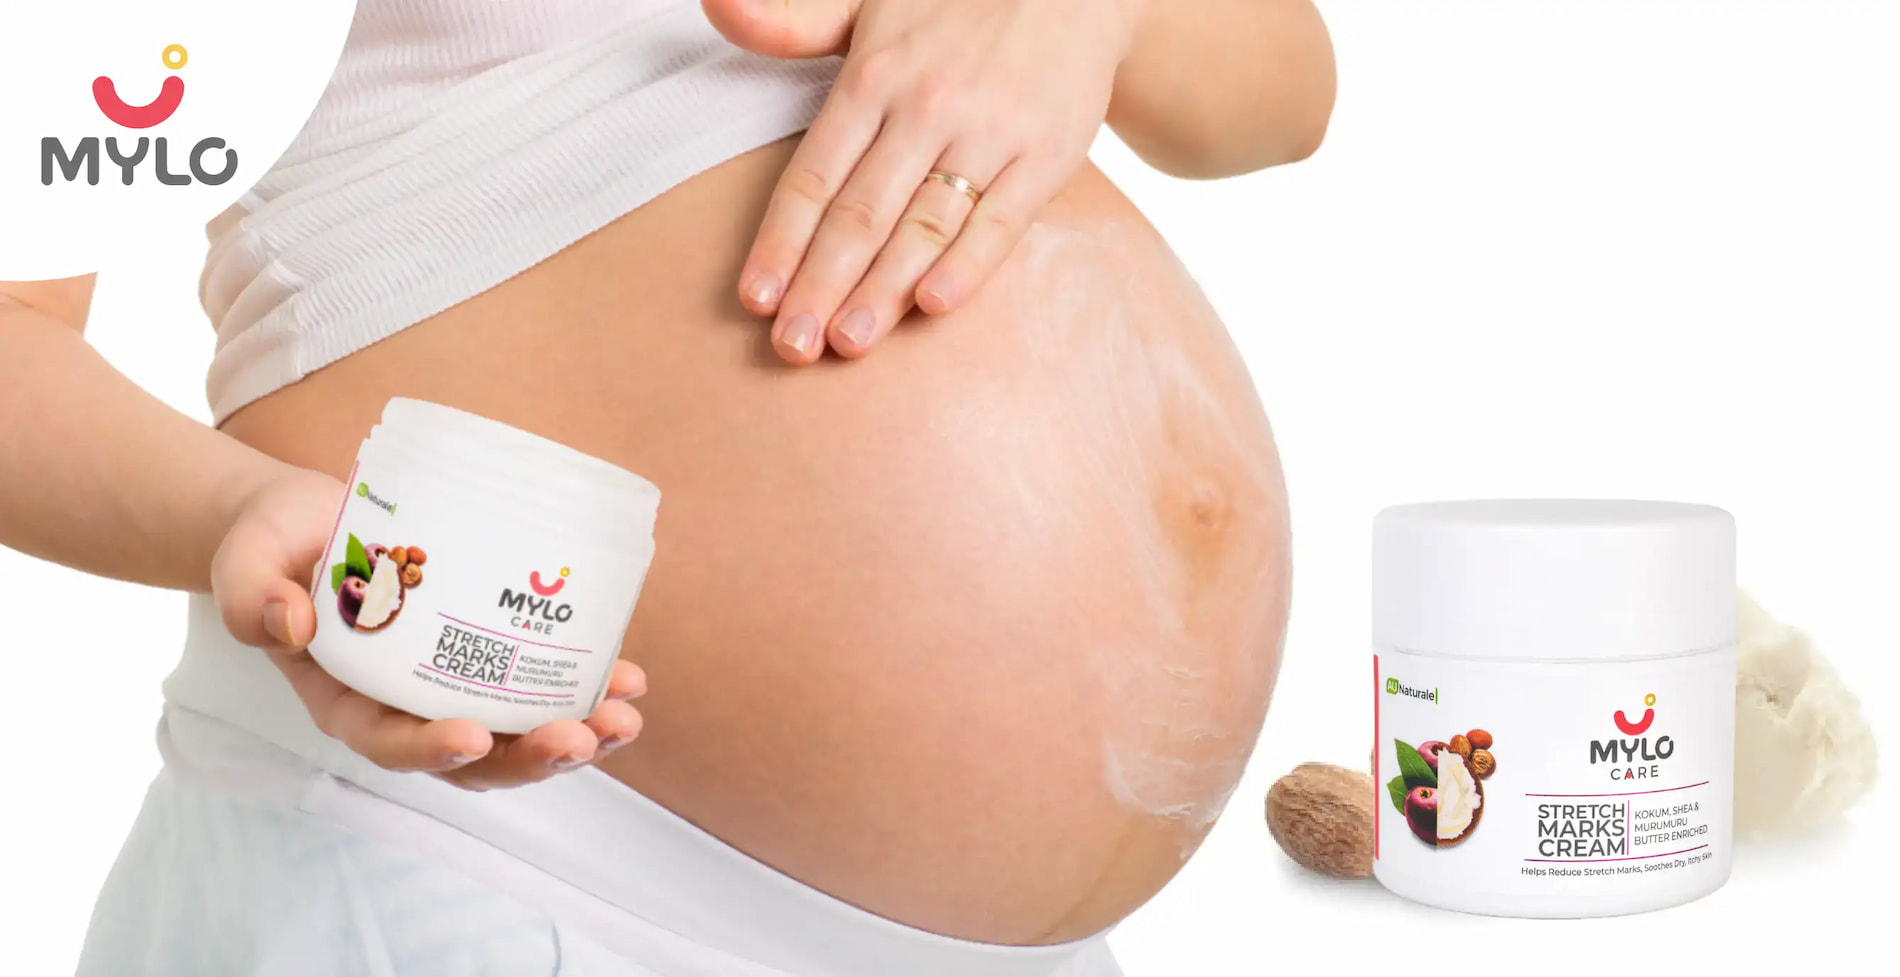 What are The Uses of Mylo Stretch Marks Cream?